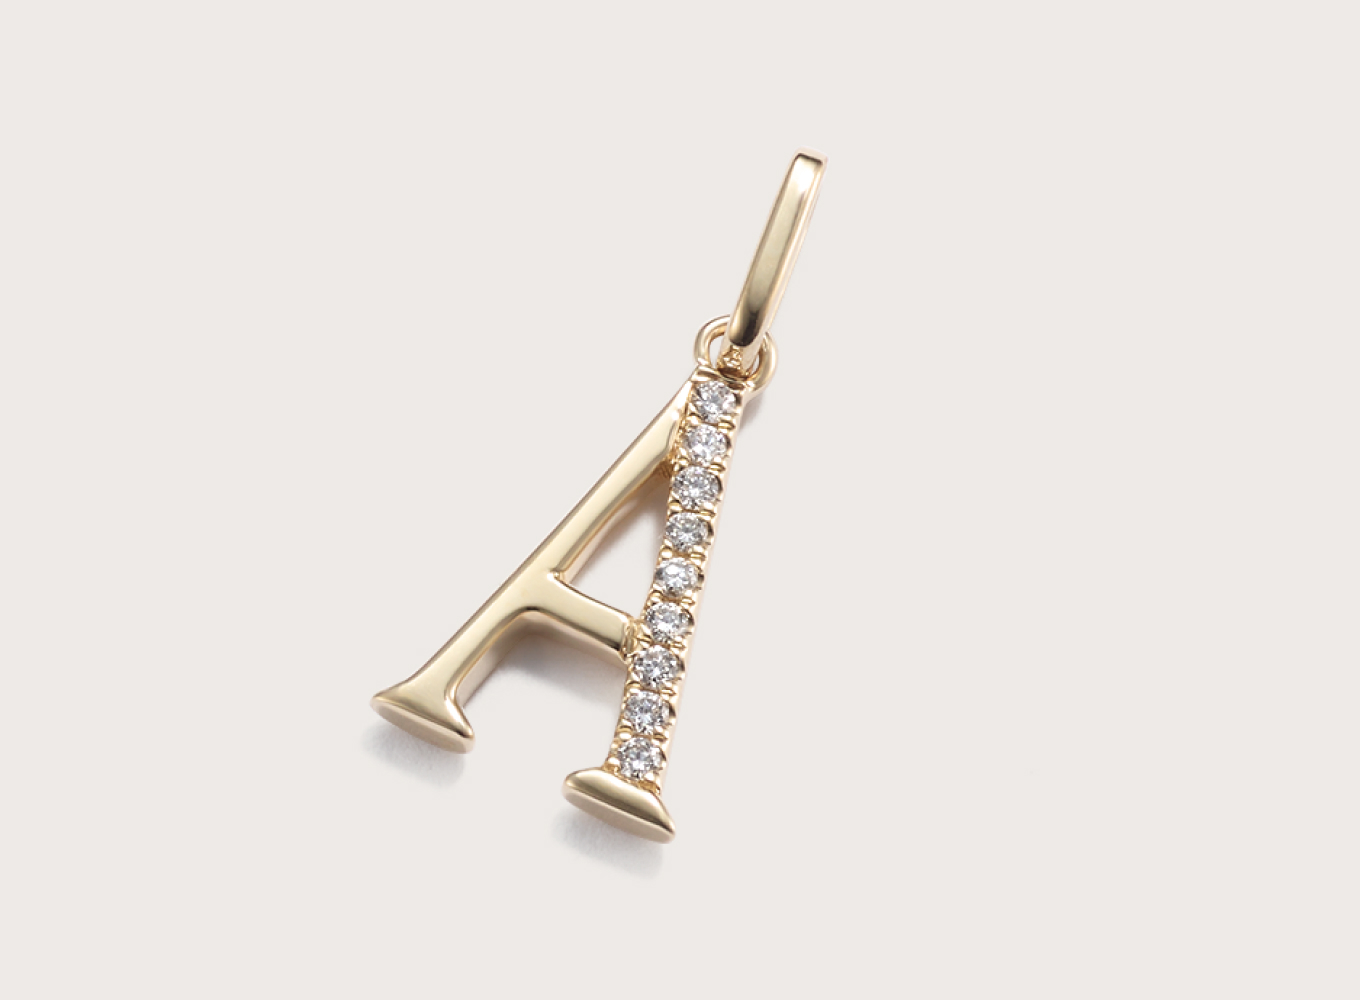 Diamond Accent Letter A Charm This letter A initial charm is crafted in warm 14-karat yellow gold and partially lined with natural diamond accents for a touch of sparkle. Add it to a chain to create a beautiful pendant, perfect for a gift or daily accessory.